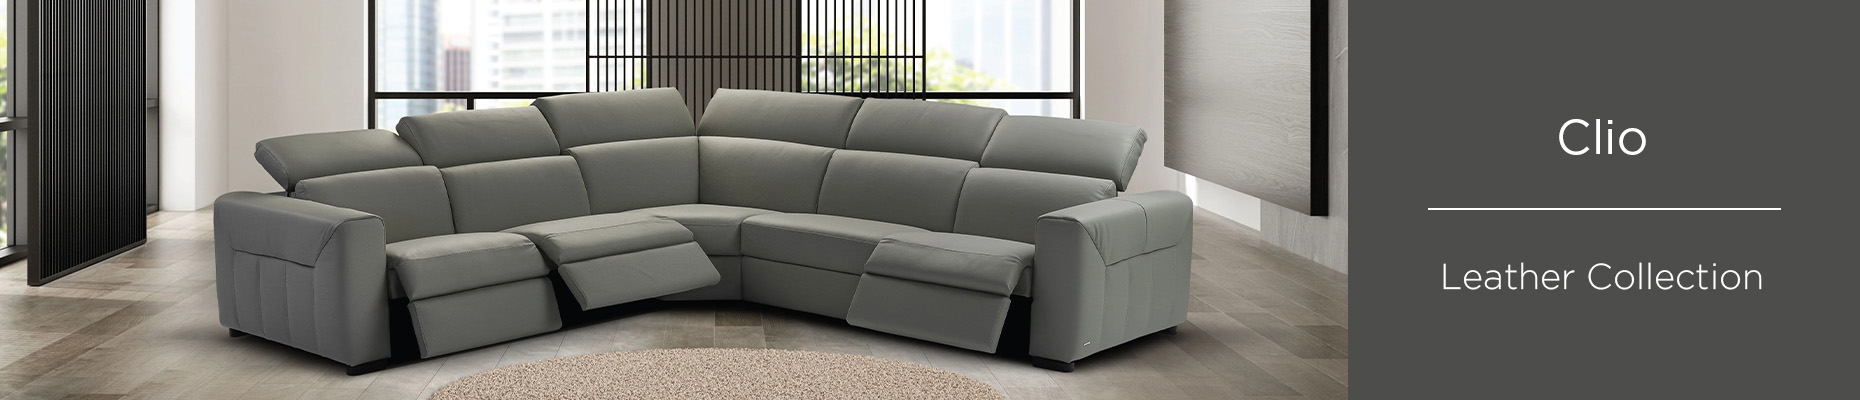 Clio Leather sofa collection at Forrest Furnishing